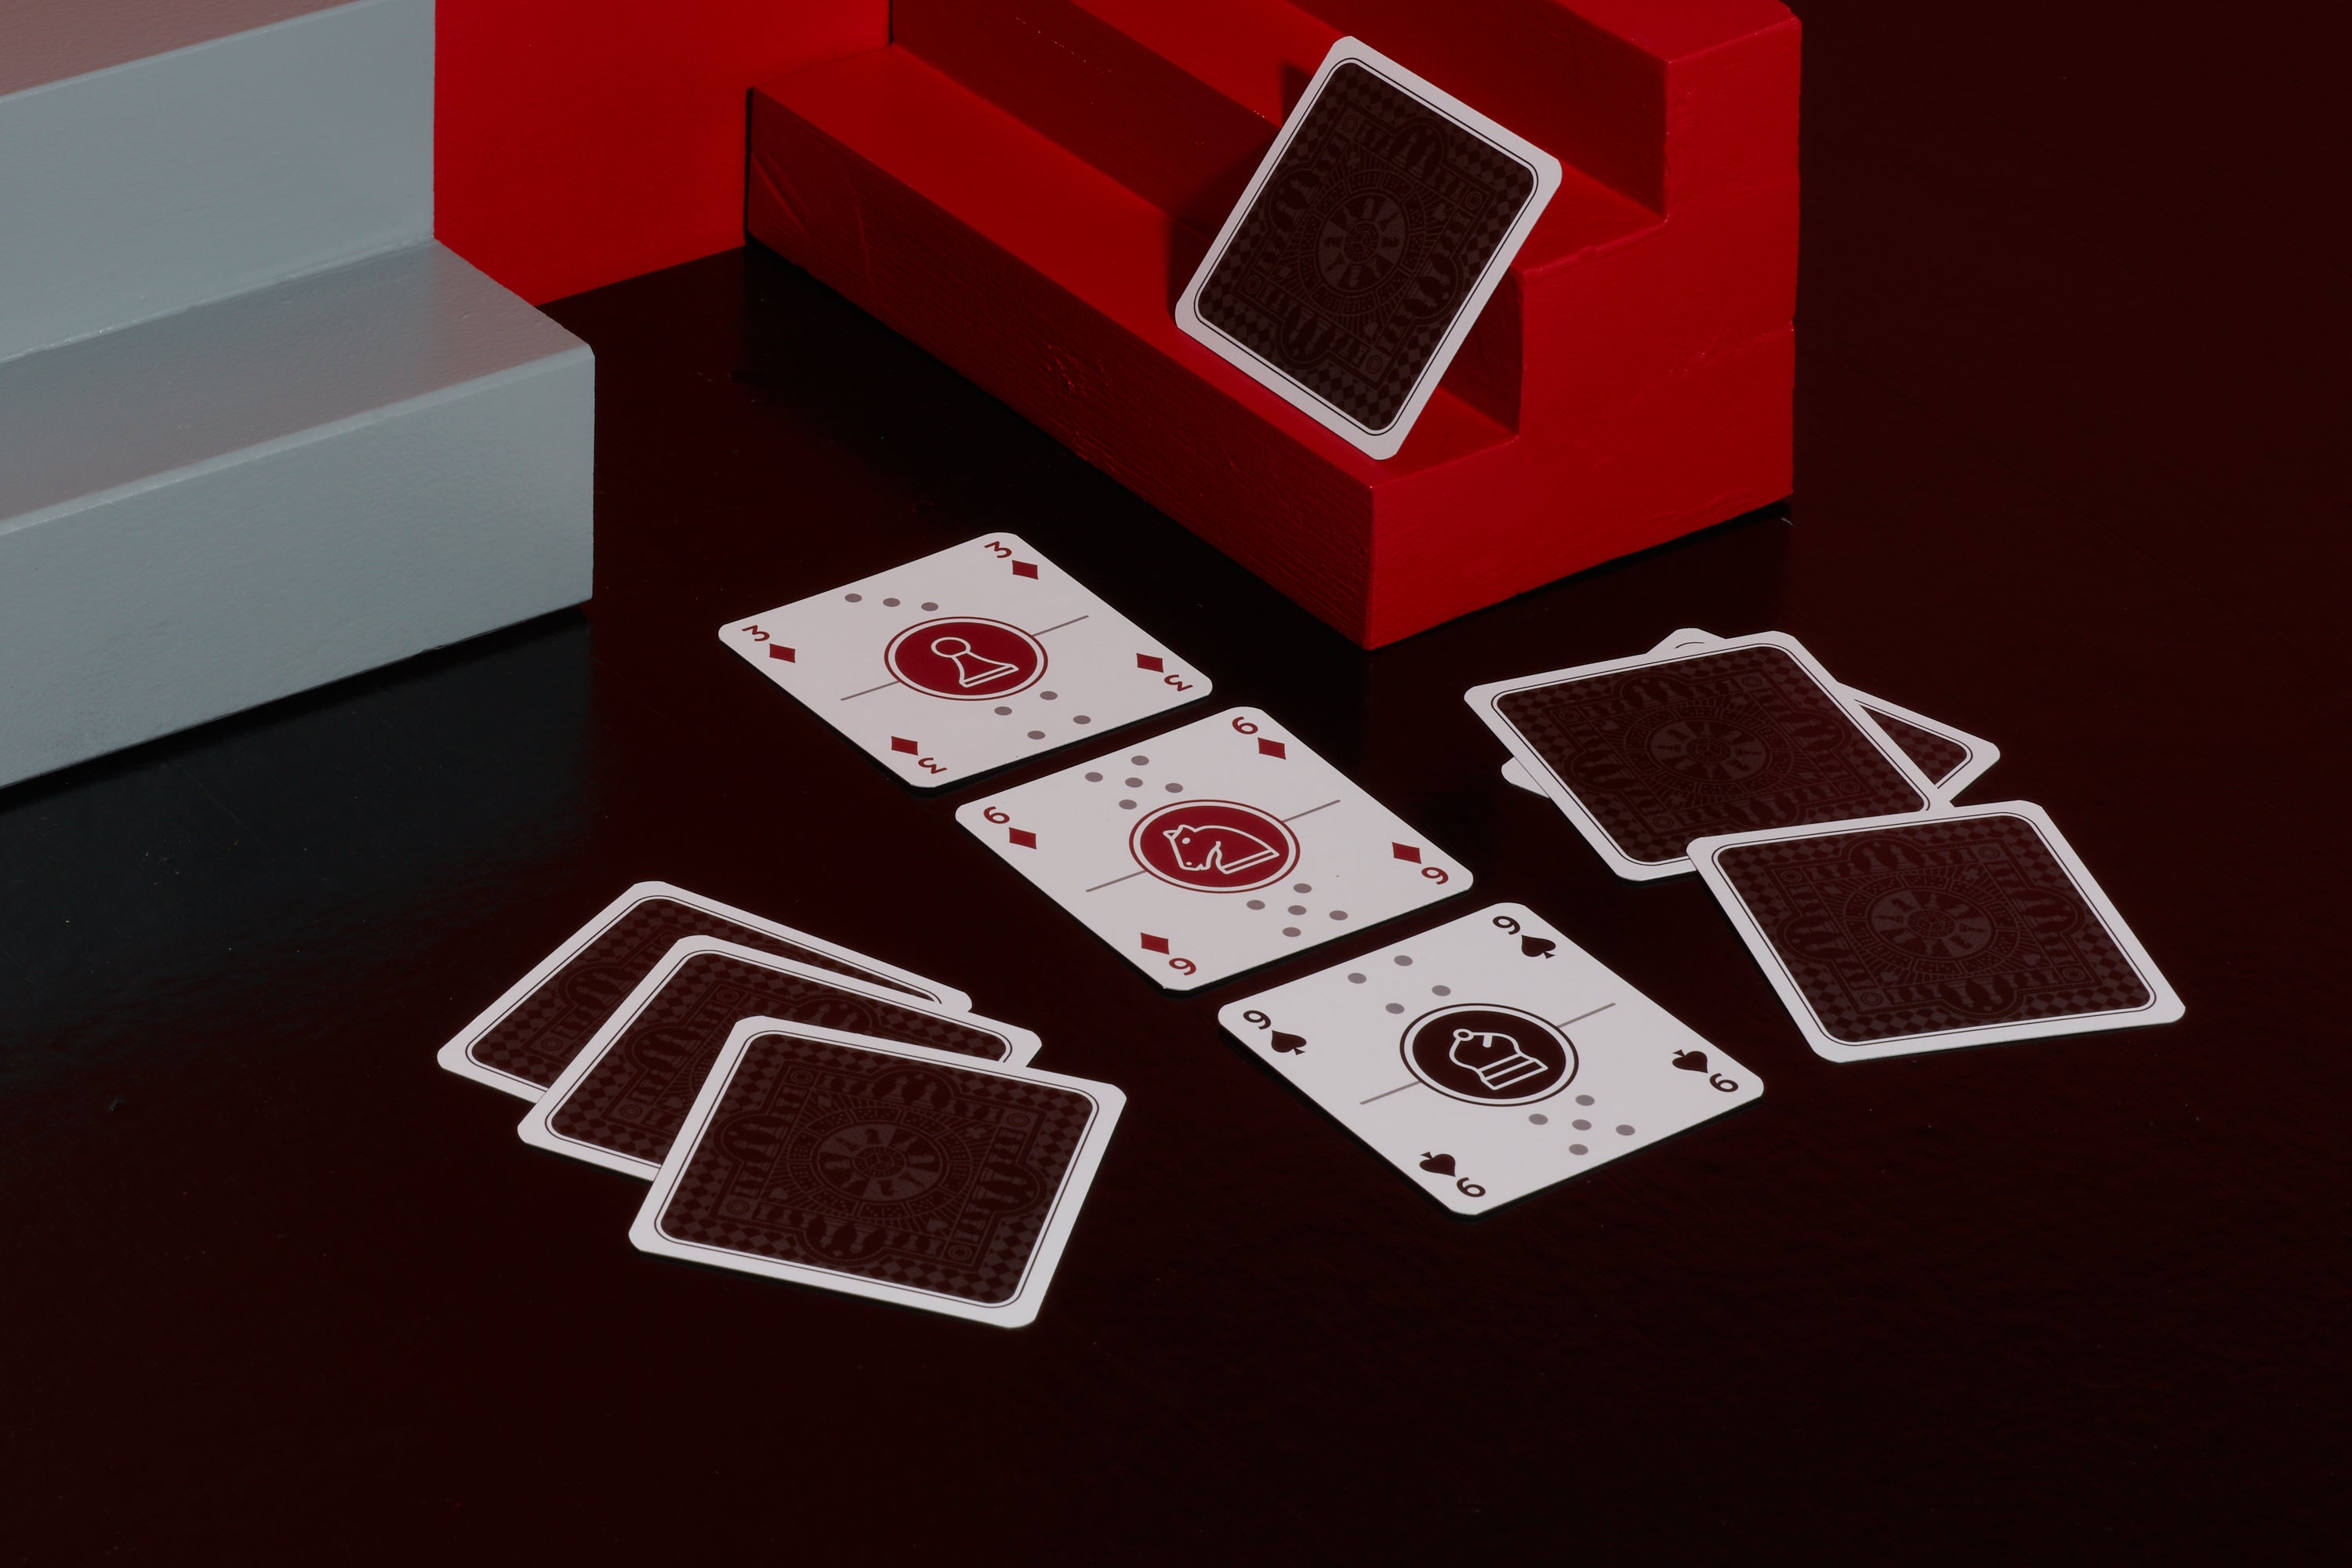 One Deck Game Cards – Cartesian Cards